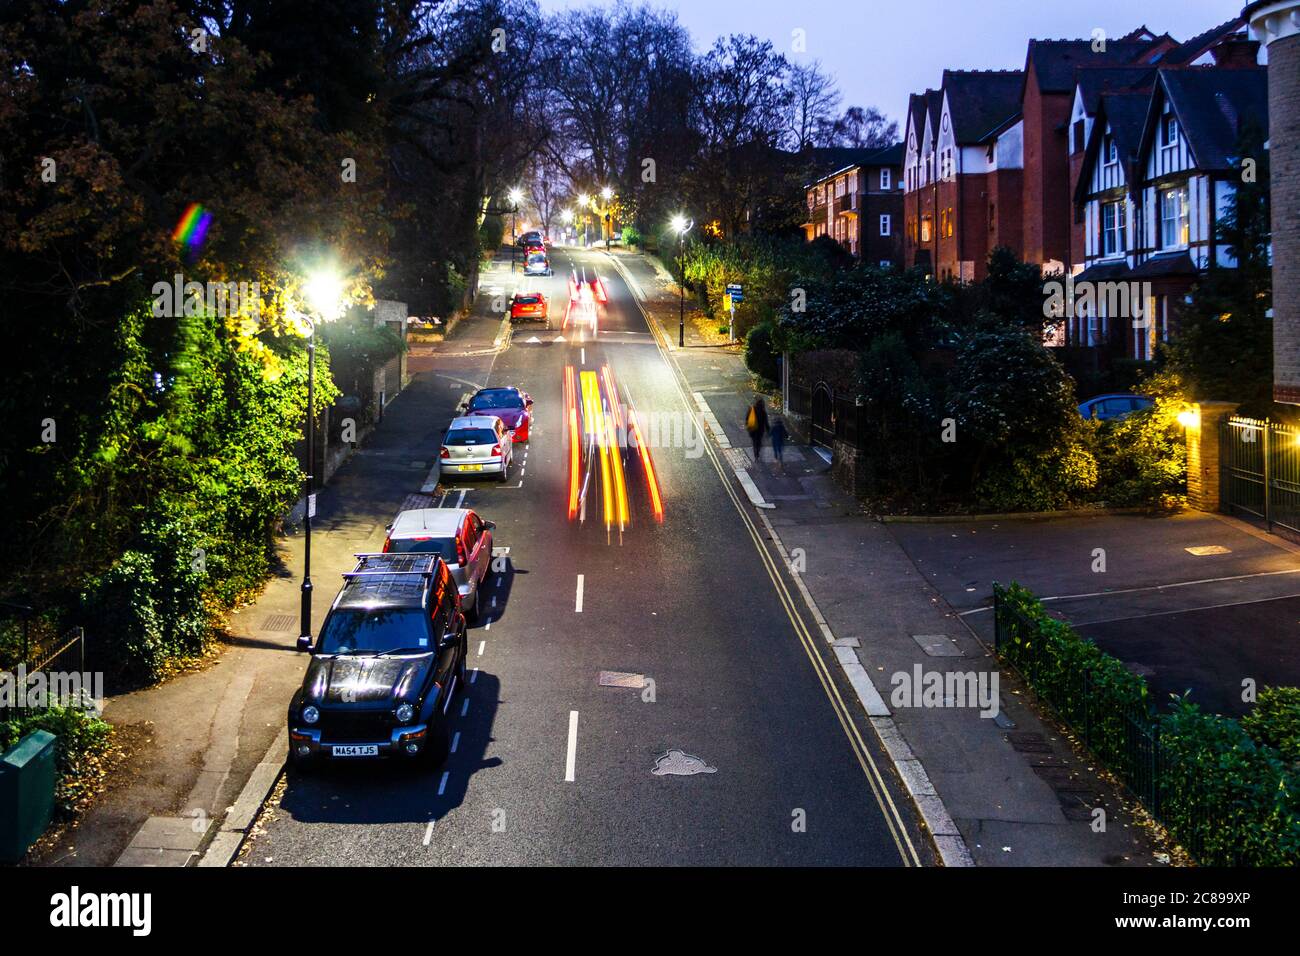 A night-time view of Stanhope Road from the bridge on Parkland Walk, cars and other traffic leaving light trails, London, UK Stock Photo